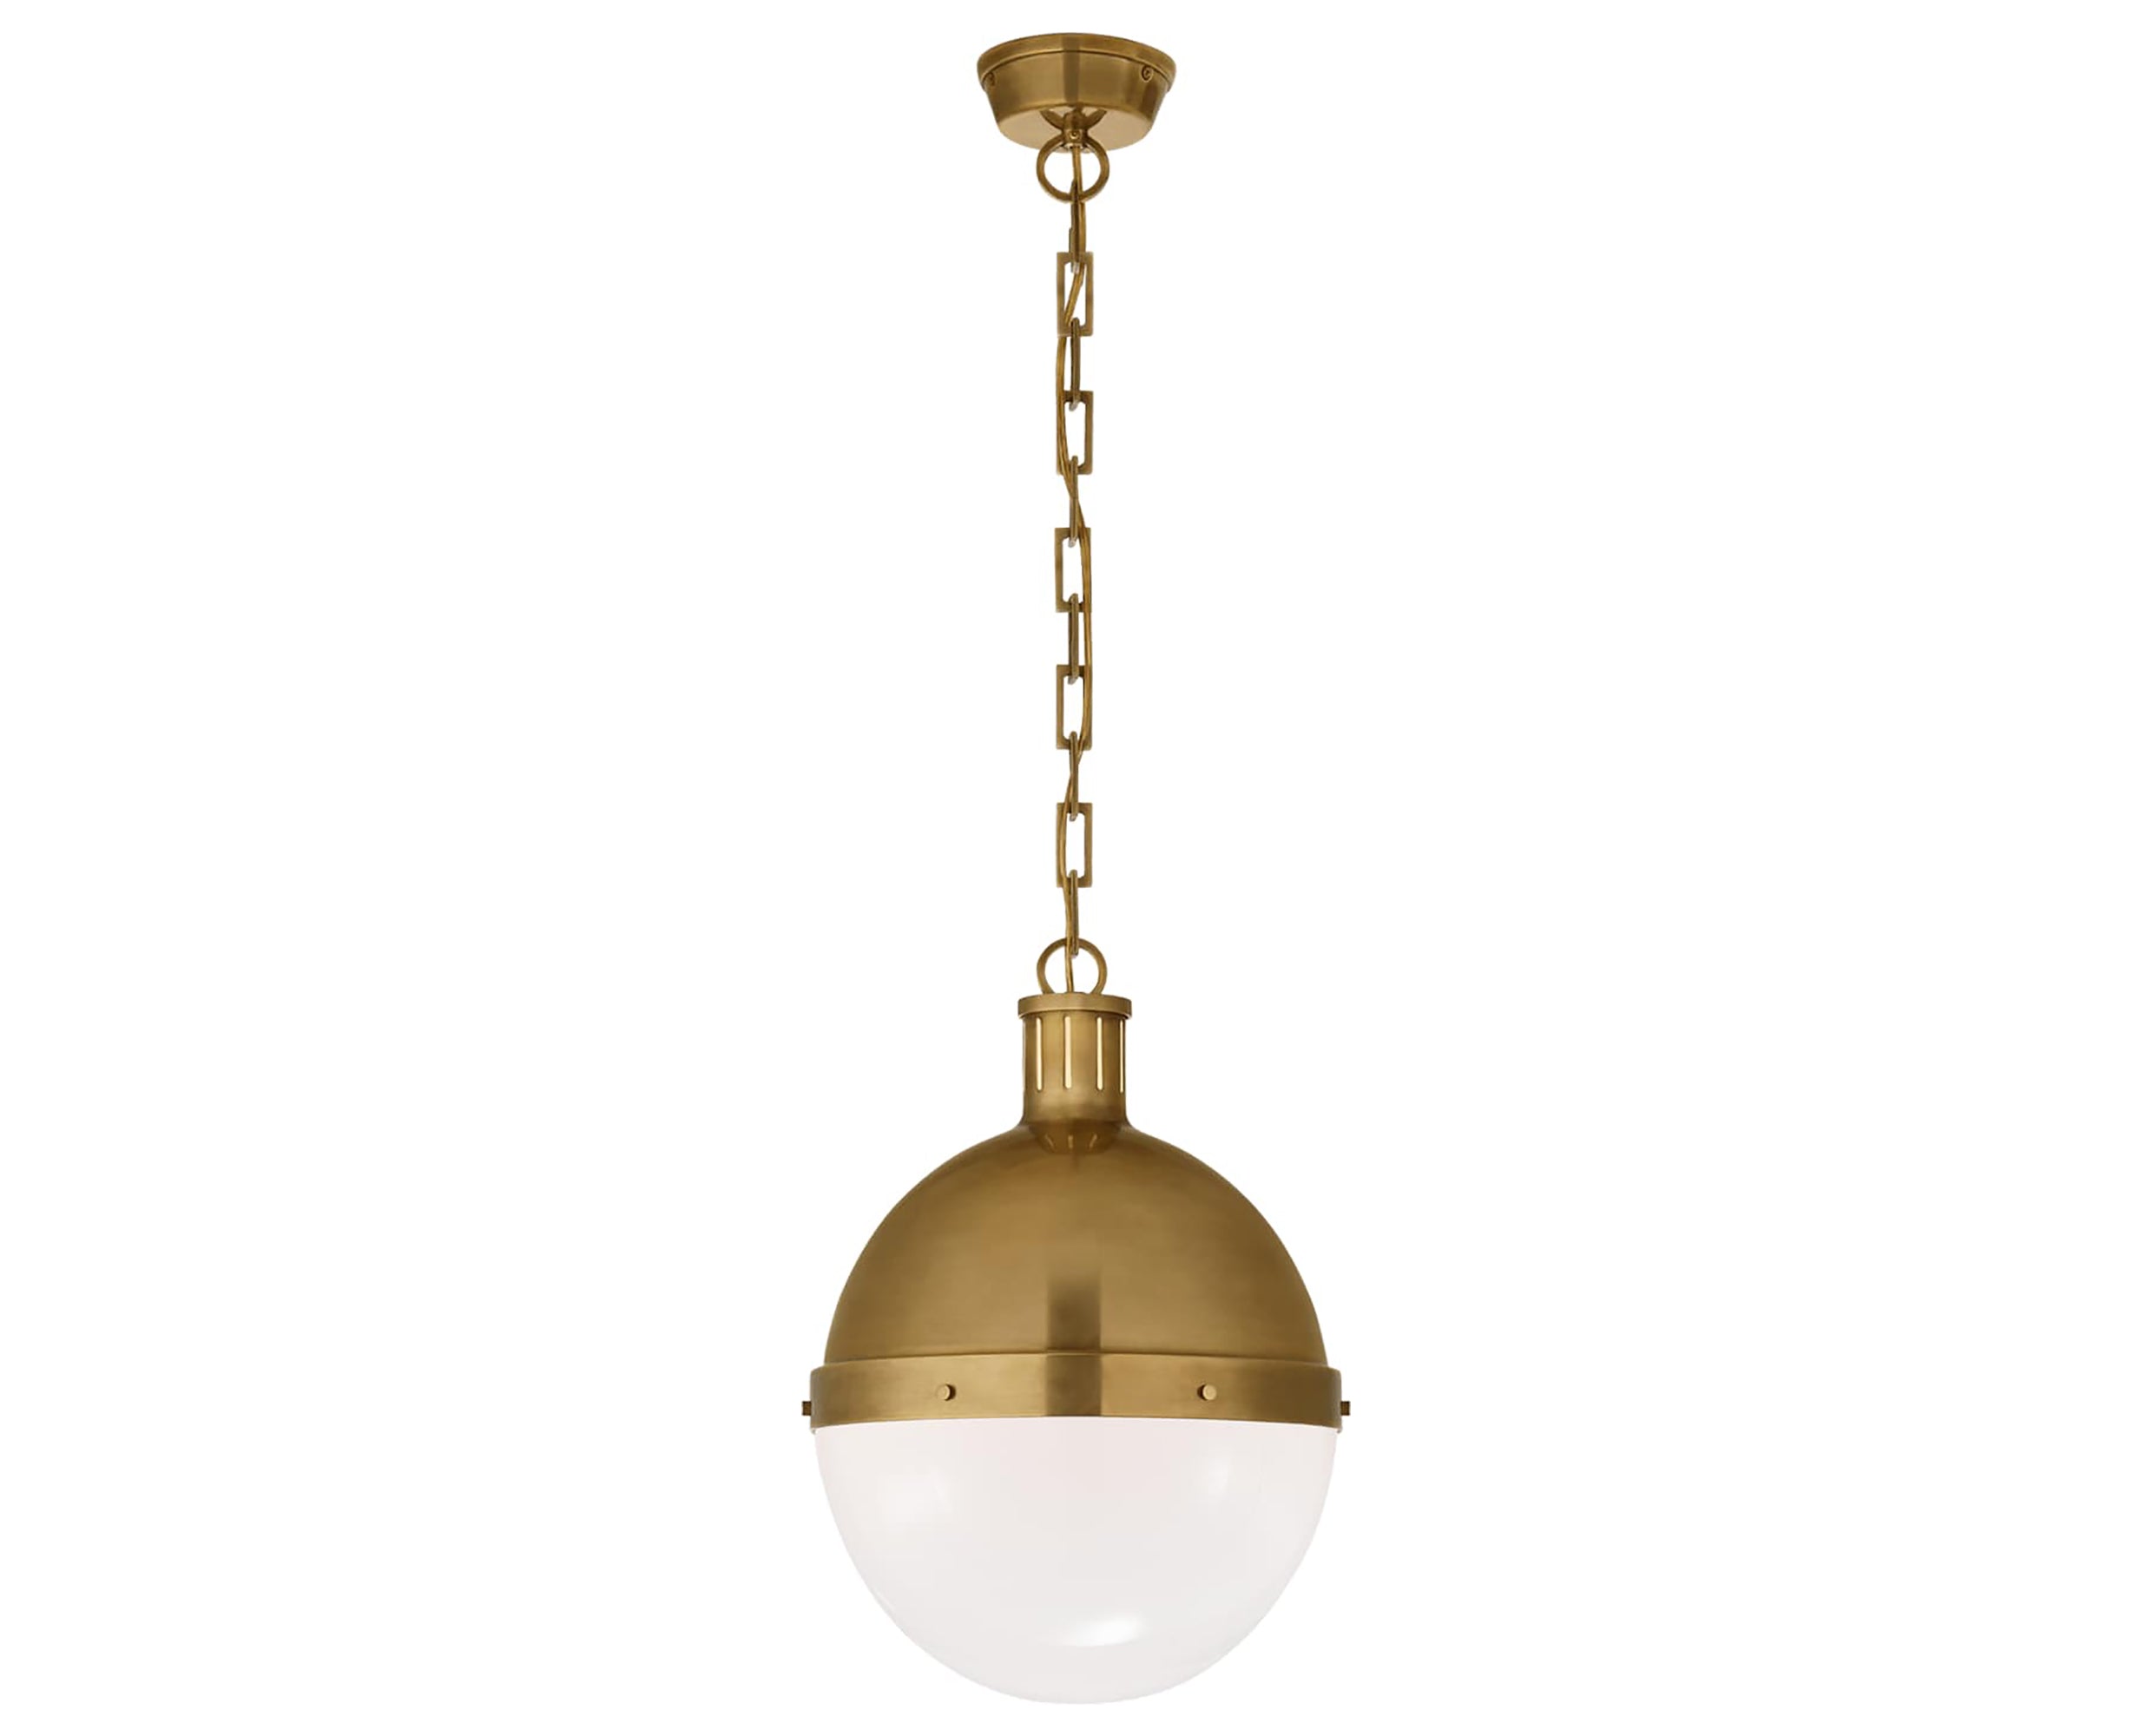 Hand-Rubbed Antique Brass &amp; White Glass | Hicks Large Pendant | Valley Ridge Furniture